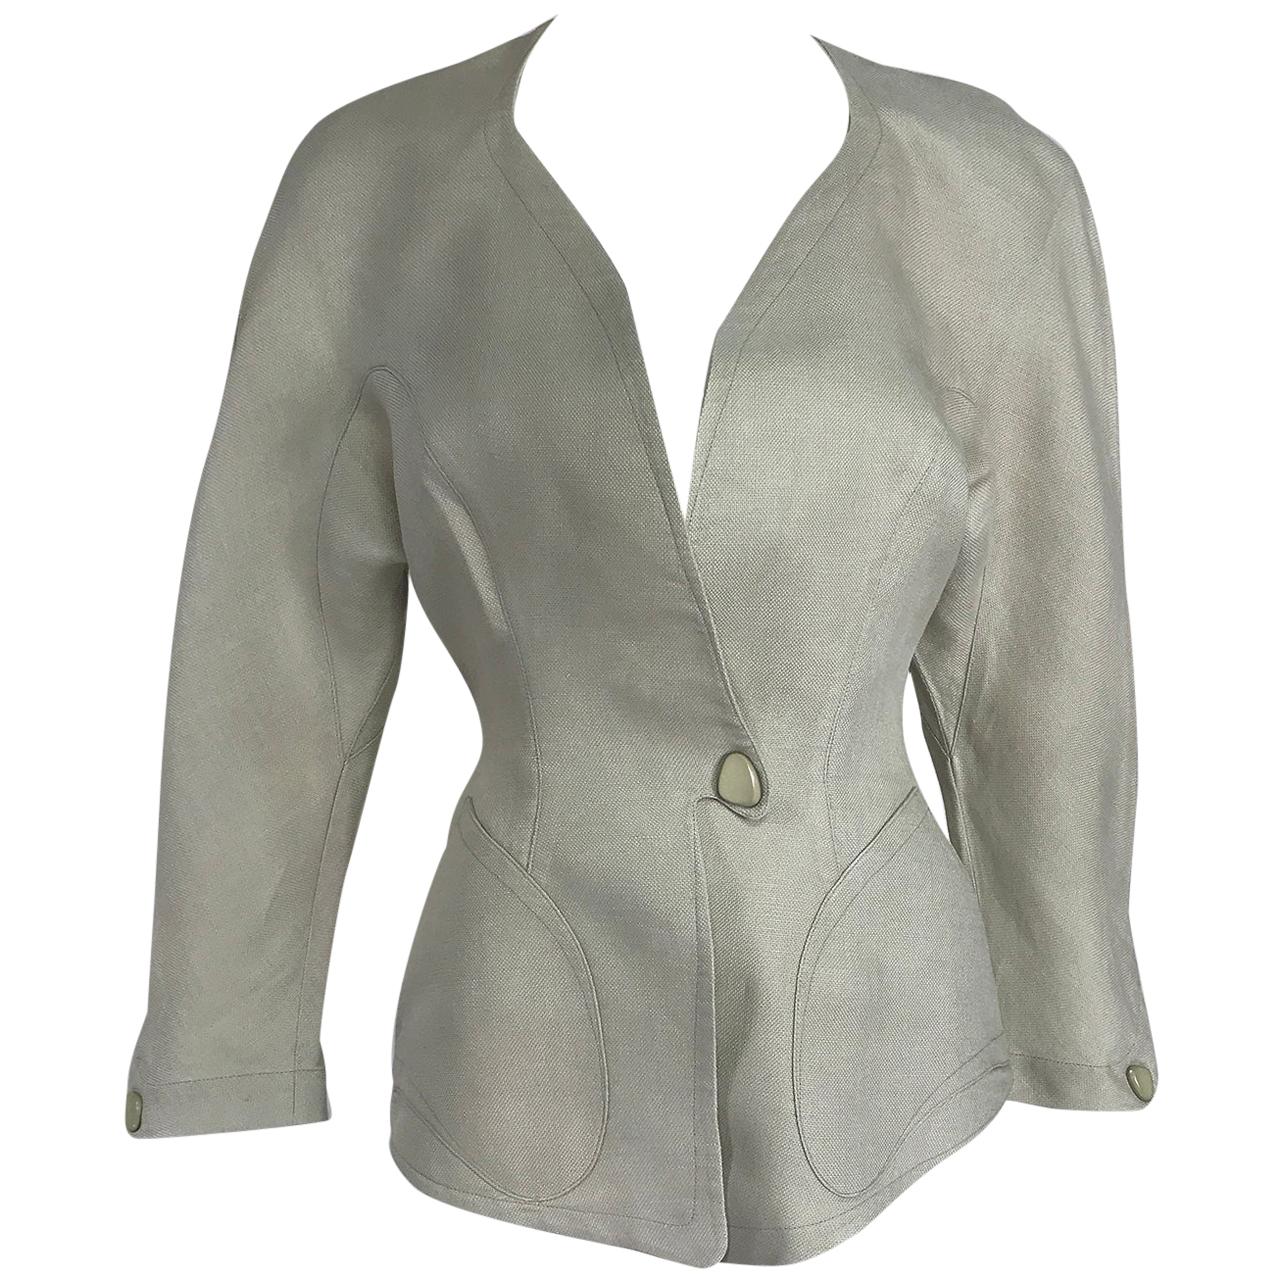 Thierry Mugler Paris Early 1990s Fitted Linen Jacket 